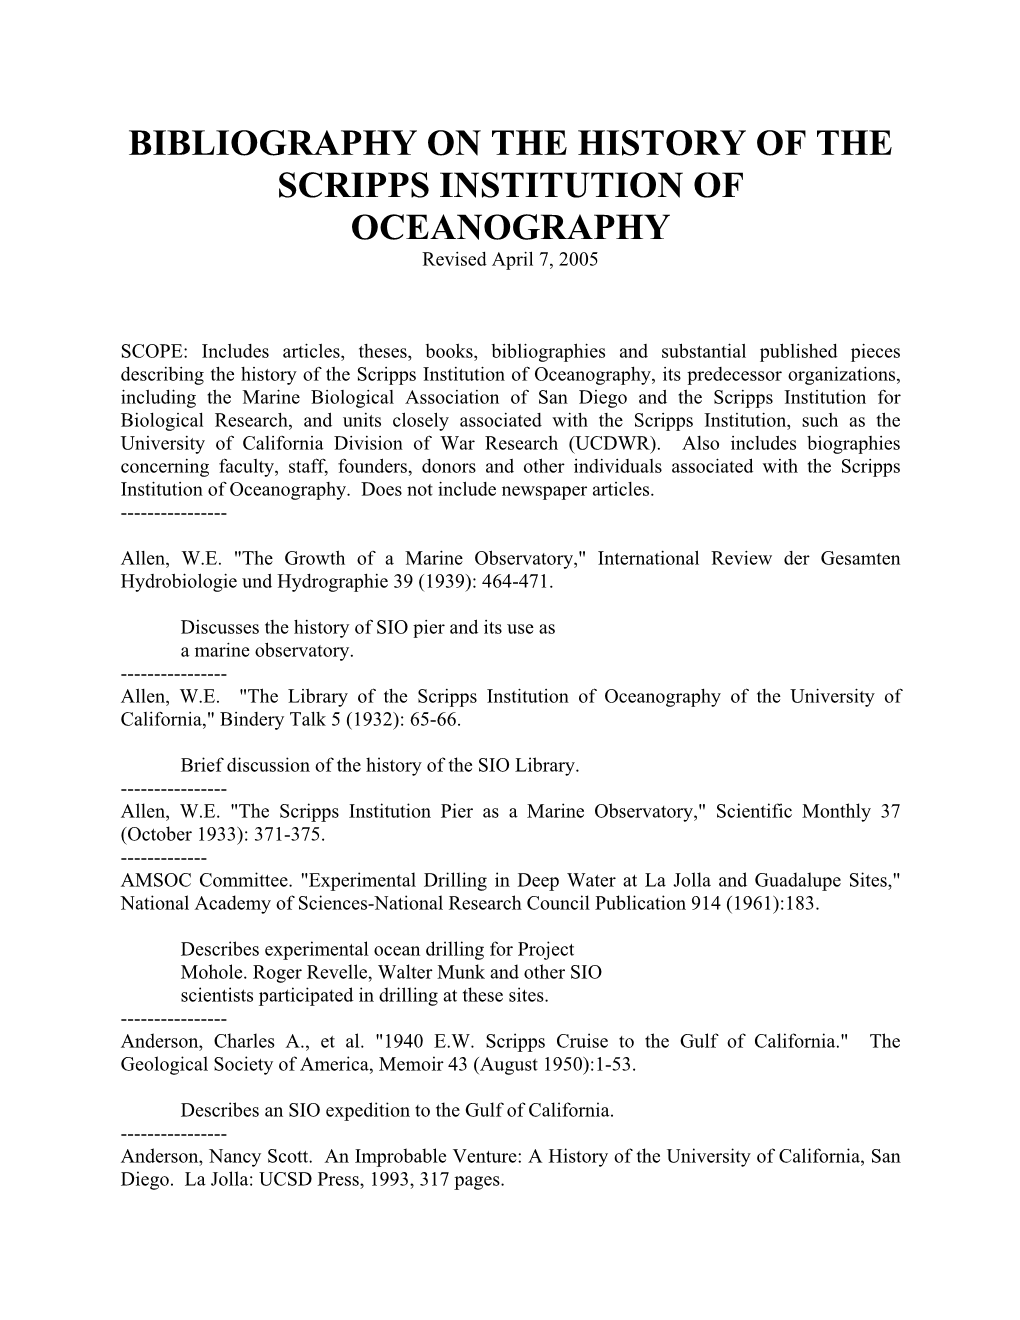 BIBLIOGRAPHY on the HISTORY of the SCRIPPS INSTITUTION of OCEANOGRAPHY Revised April 7, 2005